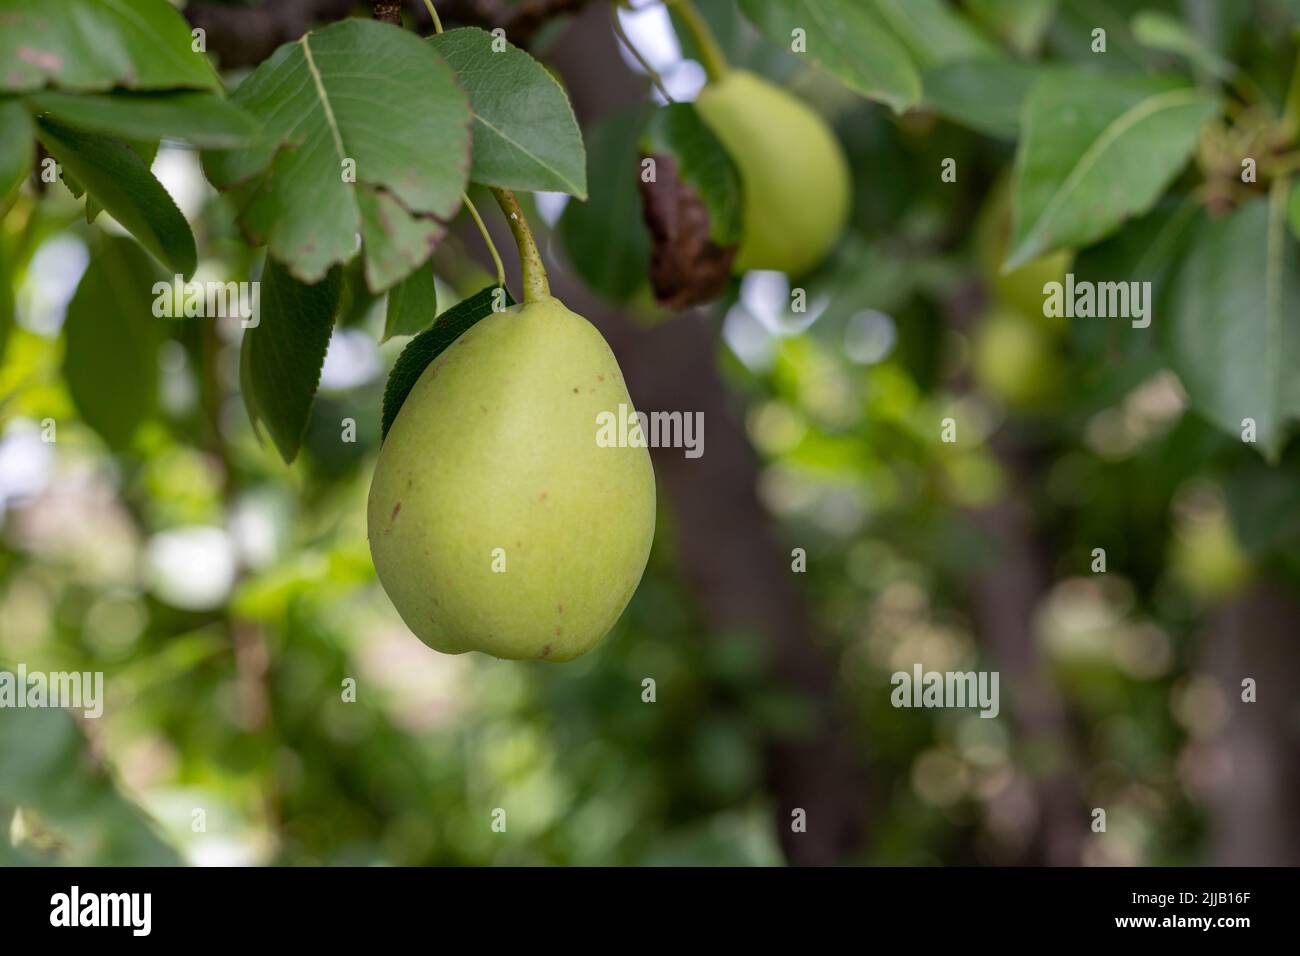 Pear fruit on a tree branch Stock Photo